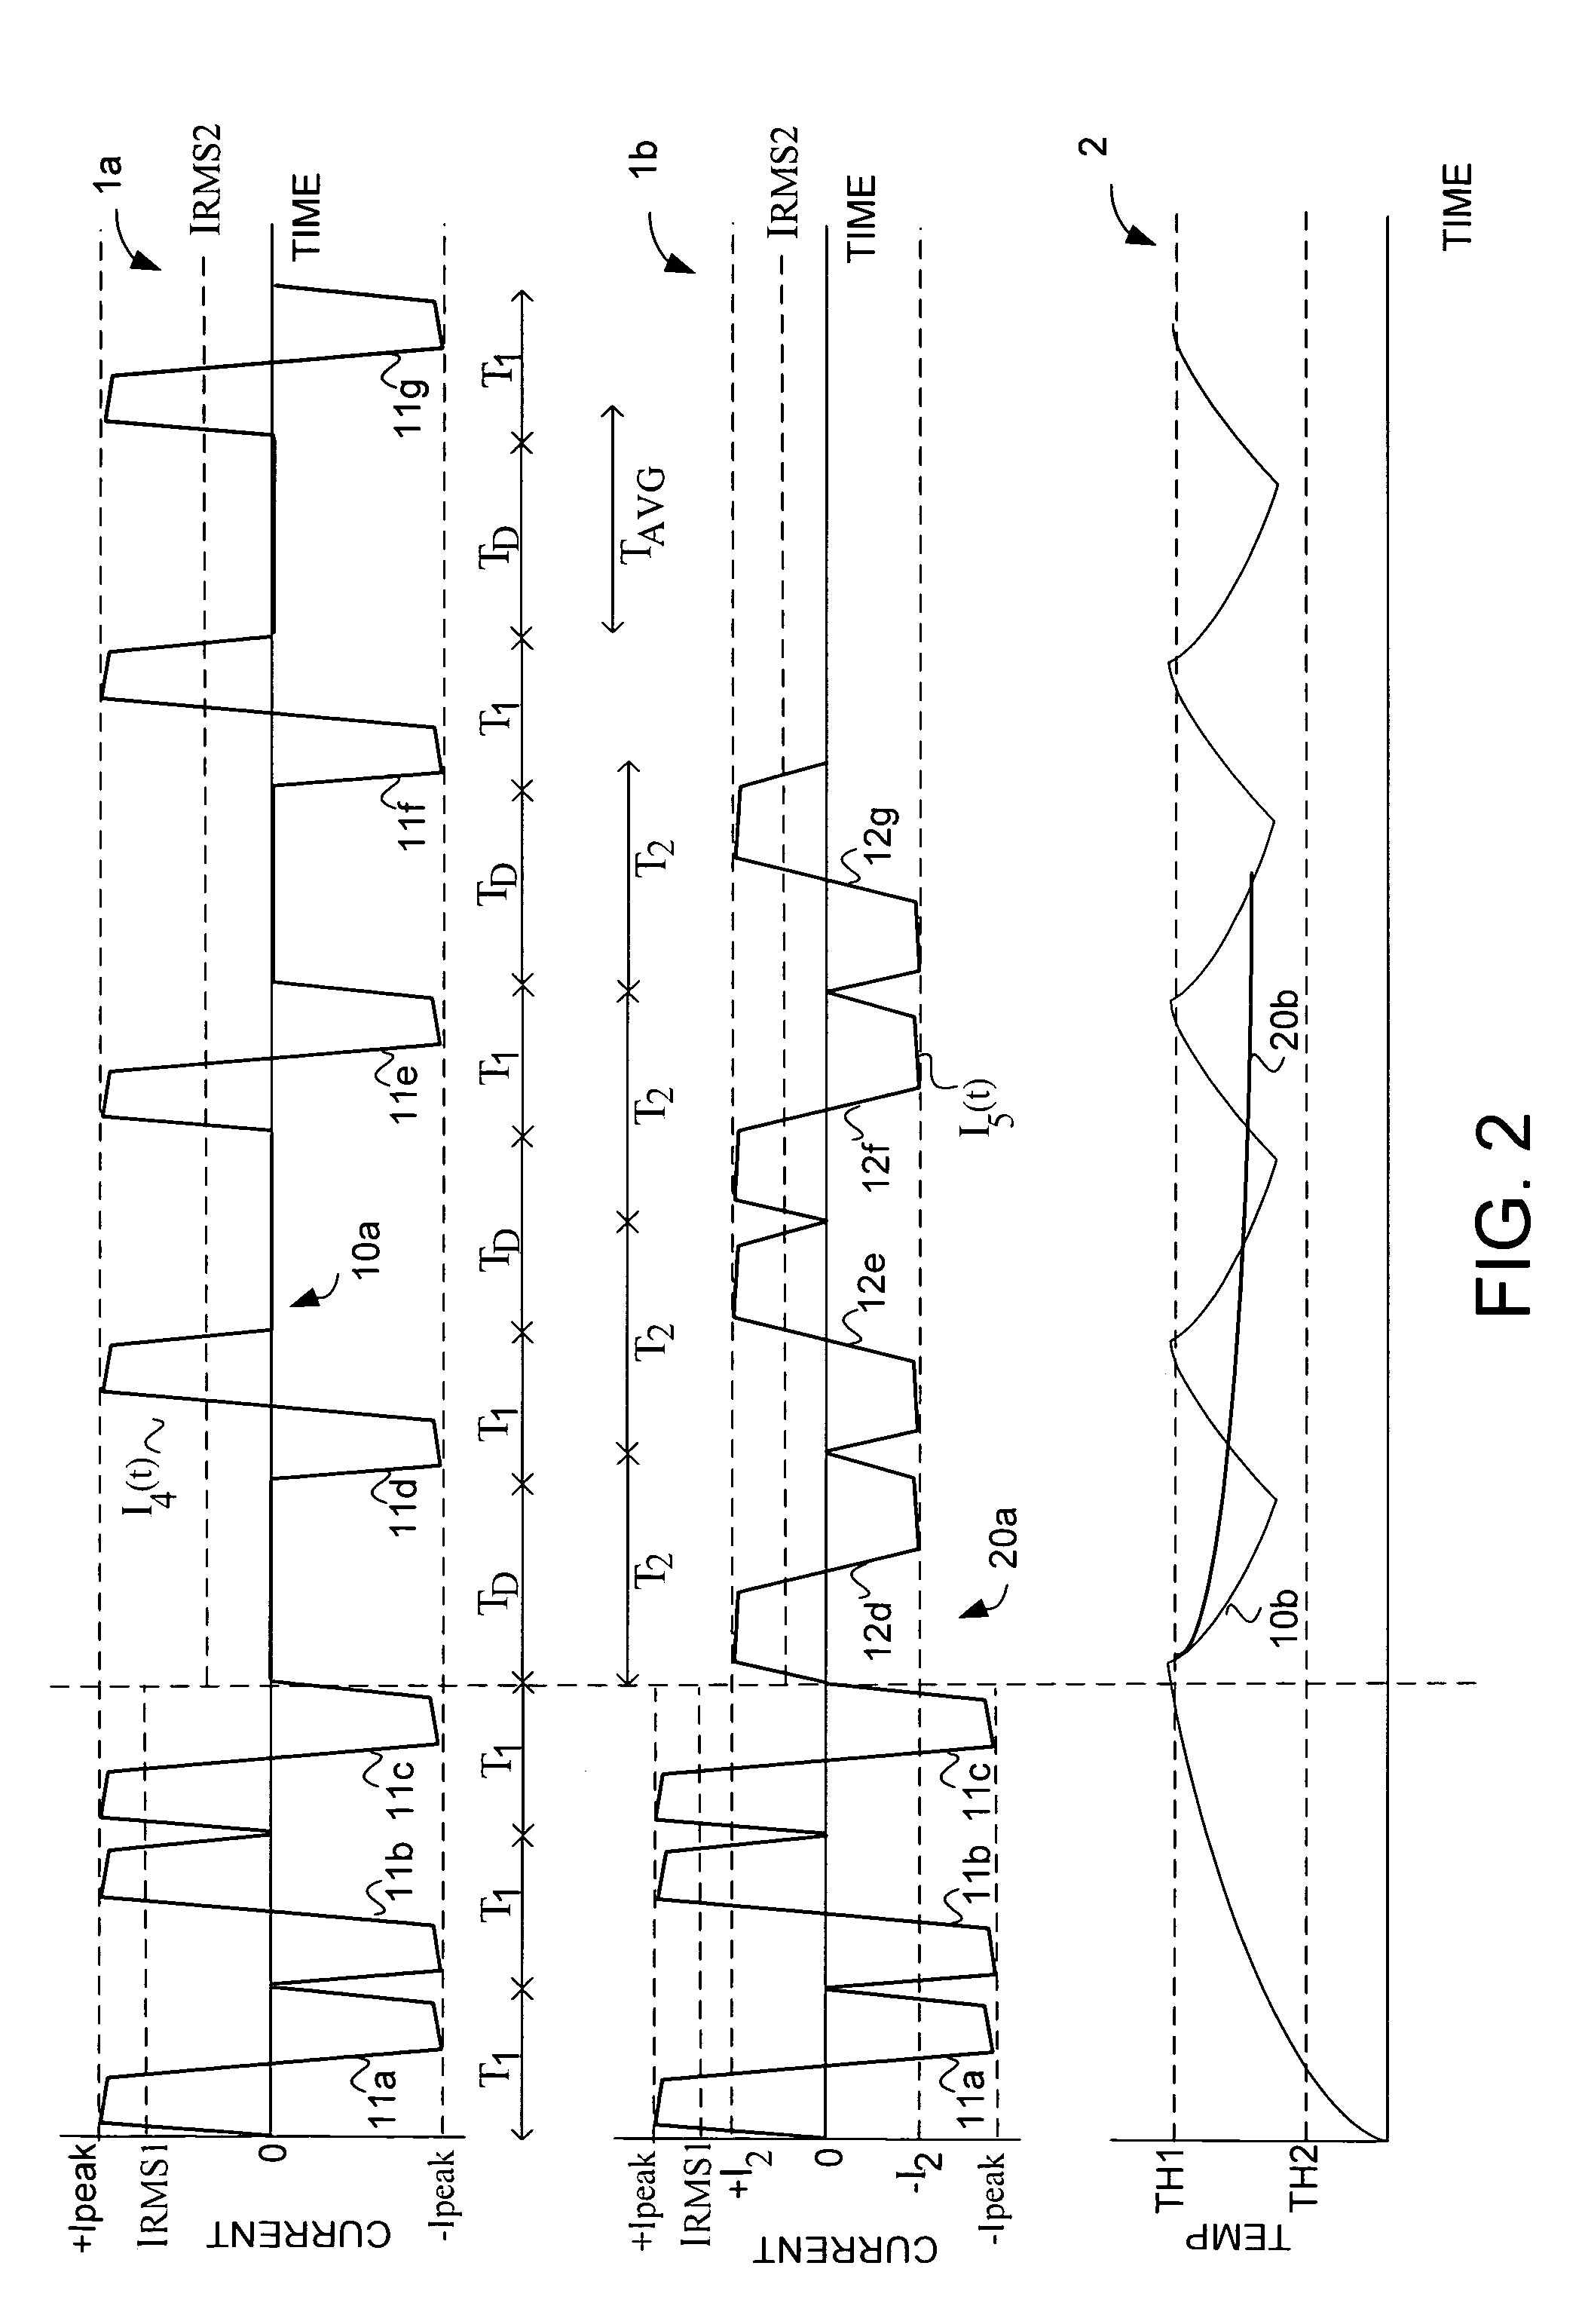 Disk drive having first and second seek operating modes for controlling voice coil motor temperature rise